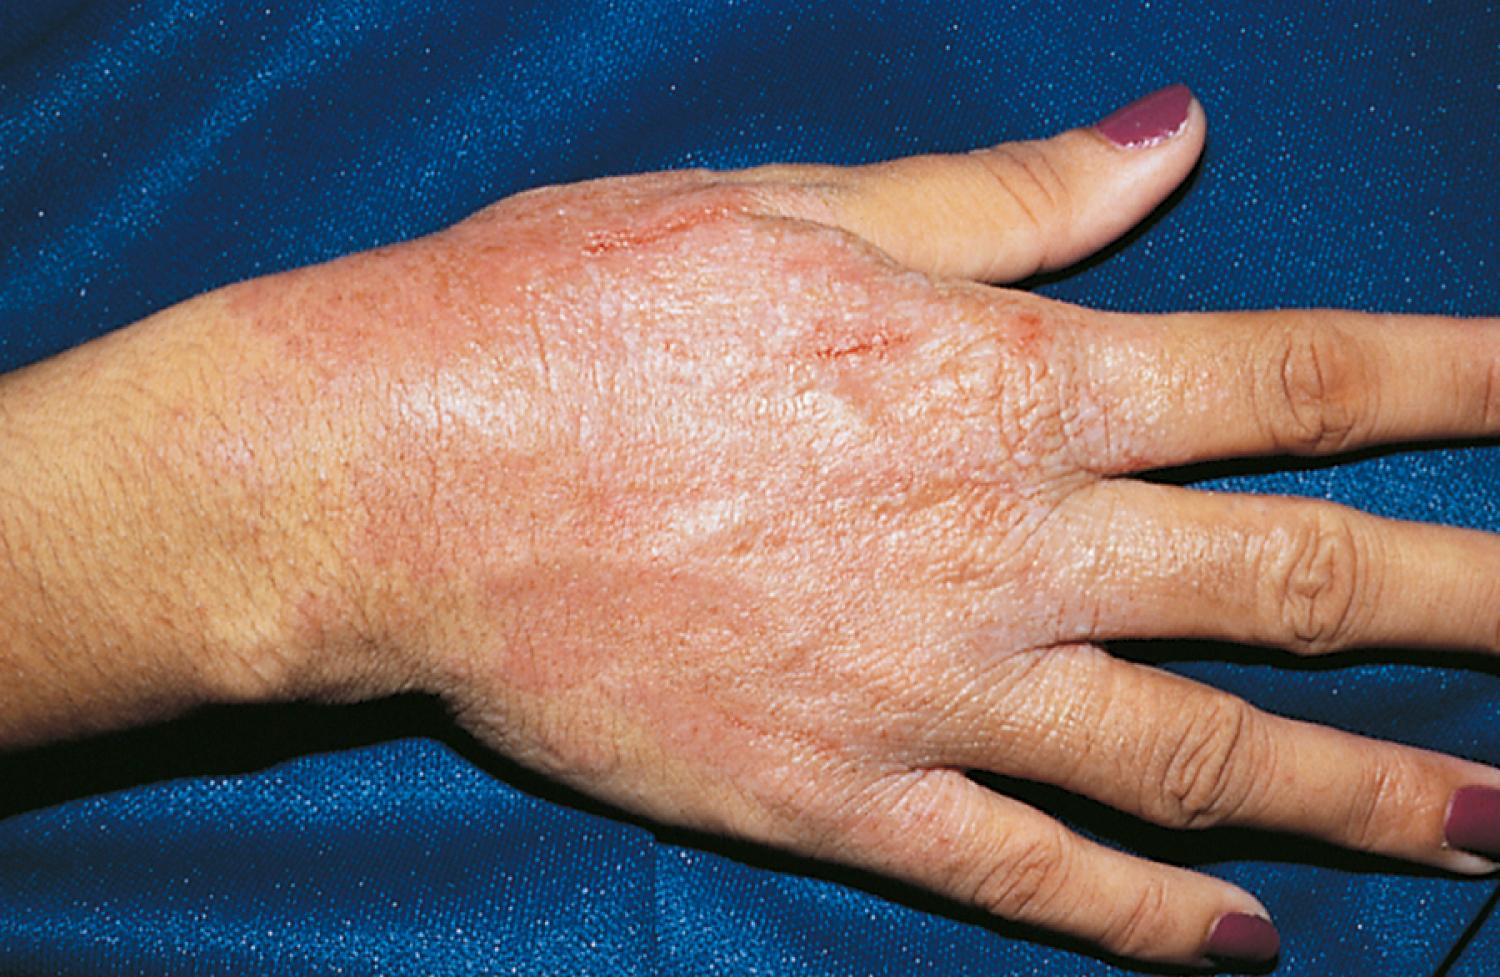 Fig. 8.33, Contact dermatitis due to topical anesthetics. This adolescent became sensitized to the topical anesthetic benzocaine (Lanacane) in a moisturizing cream that she applied to her hands daily. Note the line of demarcation at the wrist.